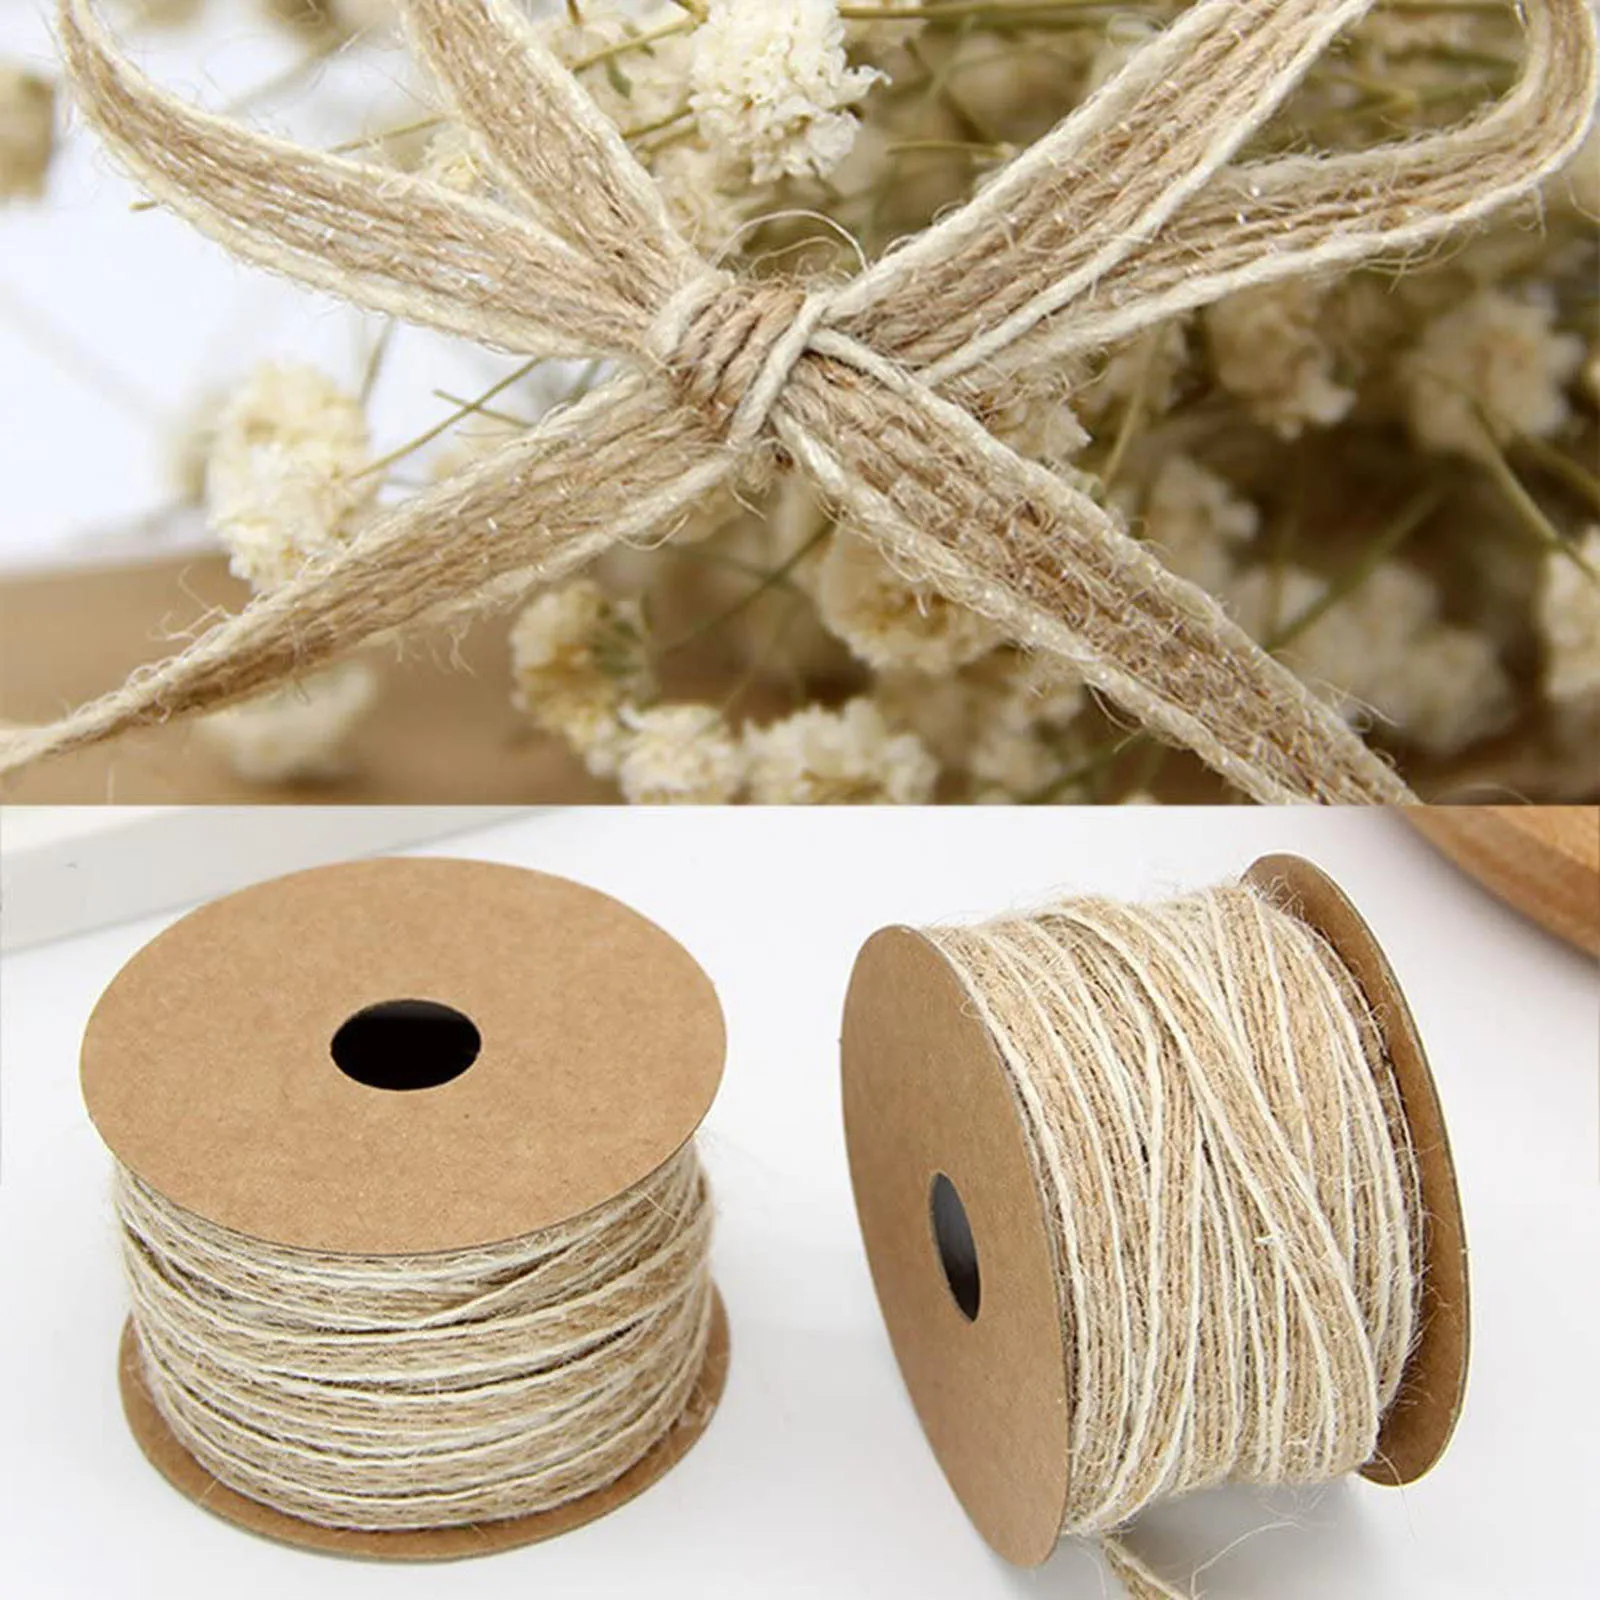 

0.5 Cm X 10m/roll Vintage Jute Burlap Hessian Ribbon With Lace Rustic Wedding Party Decoration Diy Craft Gift Packing Webbing